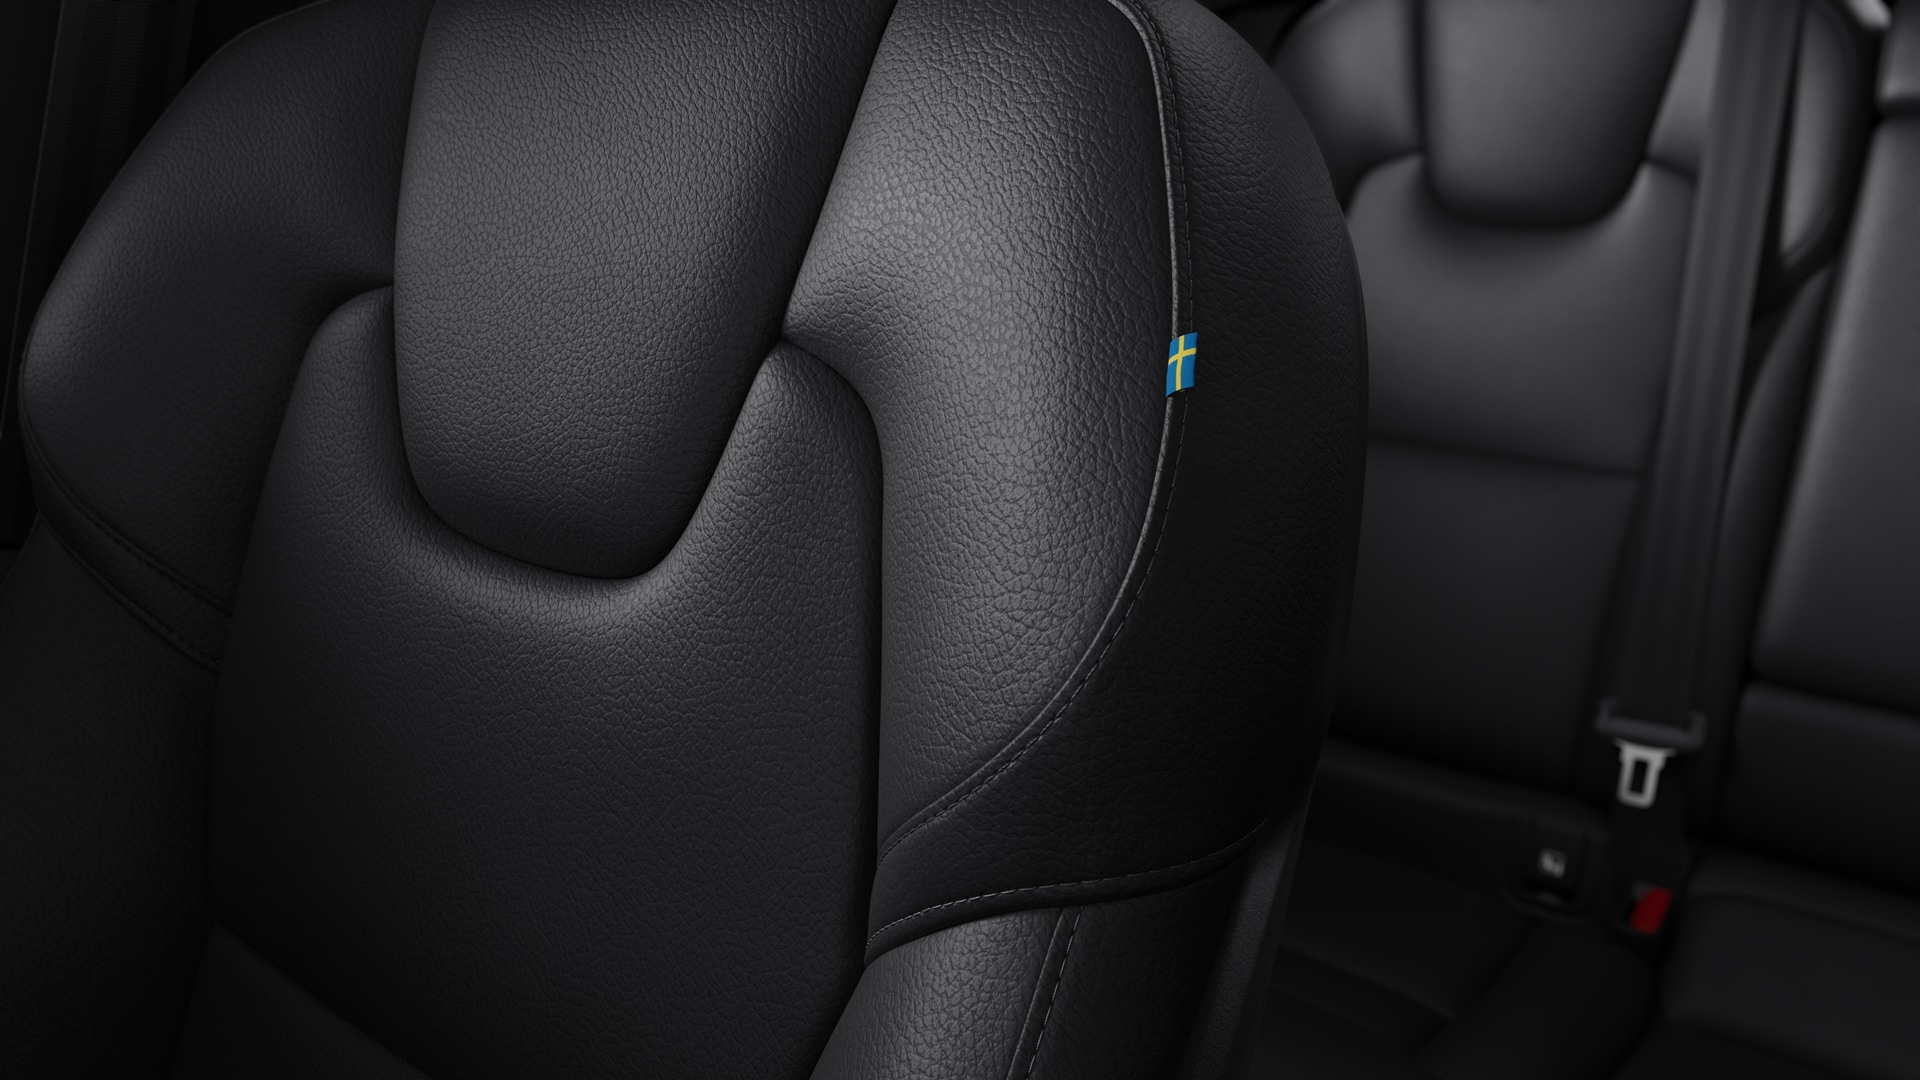 Interior close-up of the leather free Tailored Wool Blend seats in a Volvo XC60 Recharge.